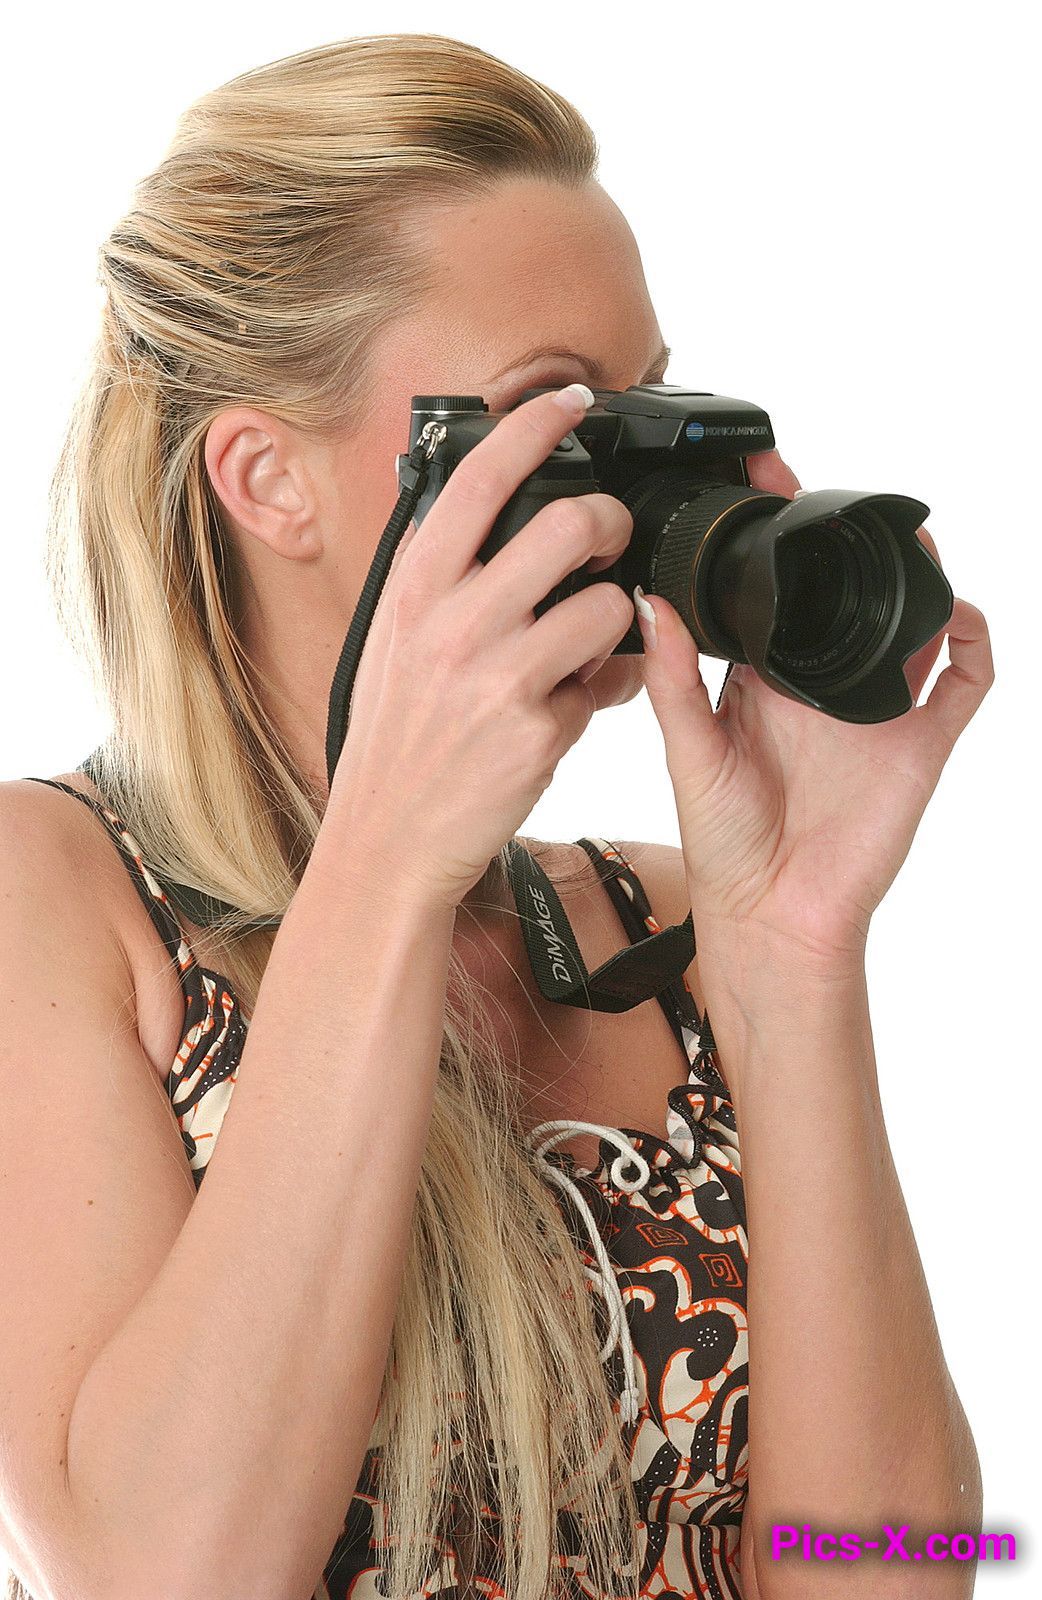 Photography Student Posing For A Friend - Matrix Models - Image 5